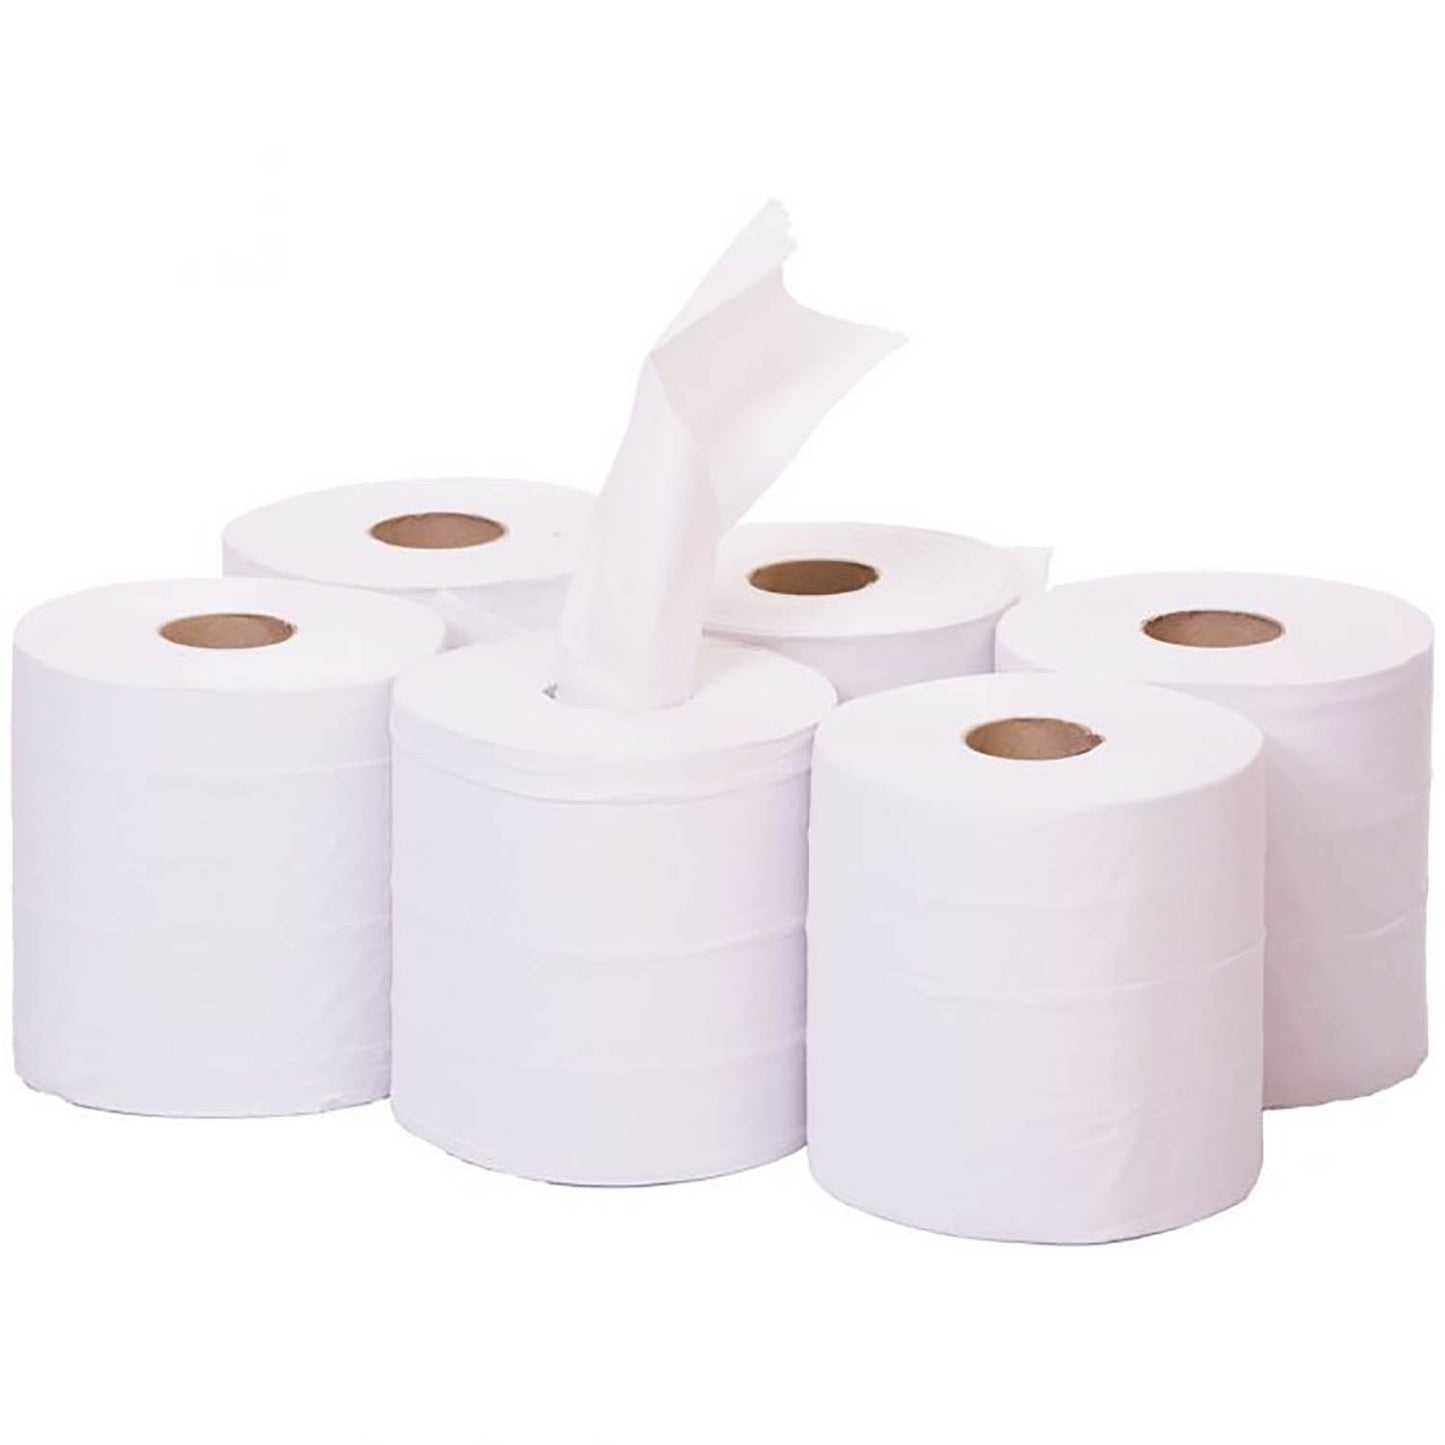 Bodyguards Envirotex Centrefeed 2 Ply White x 6